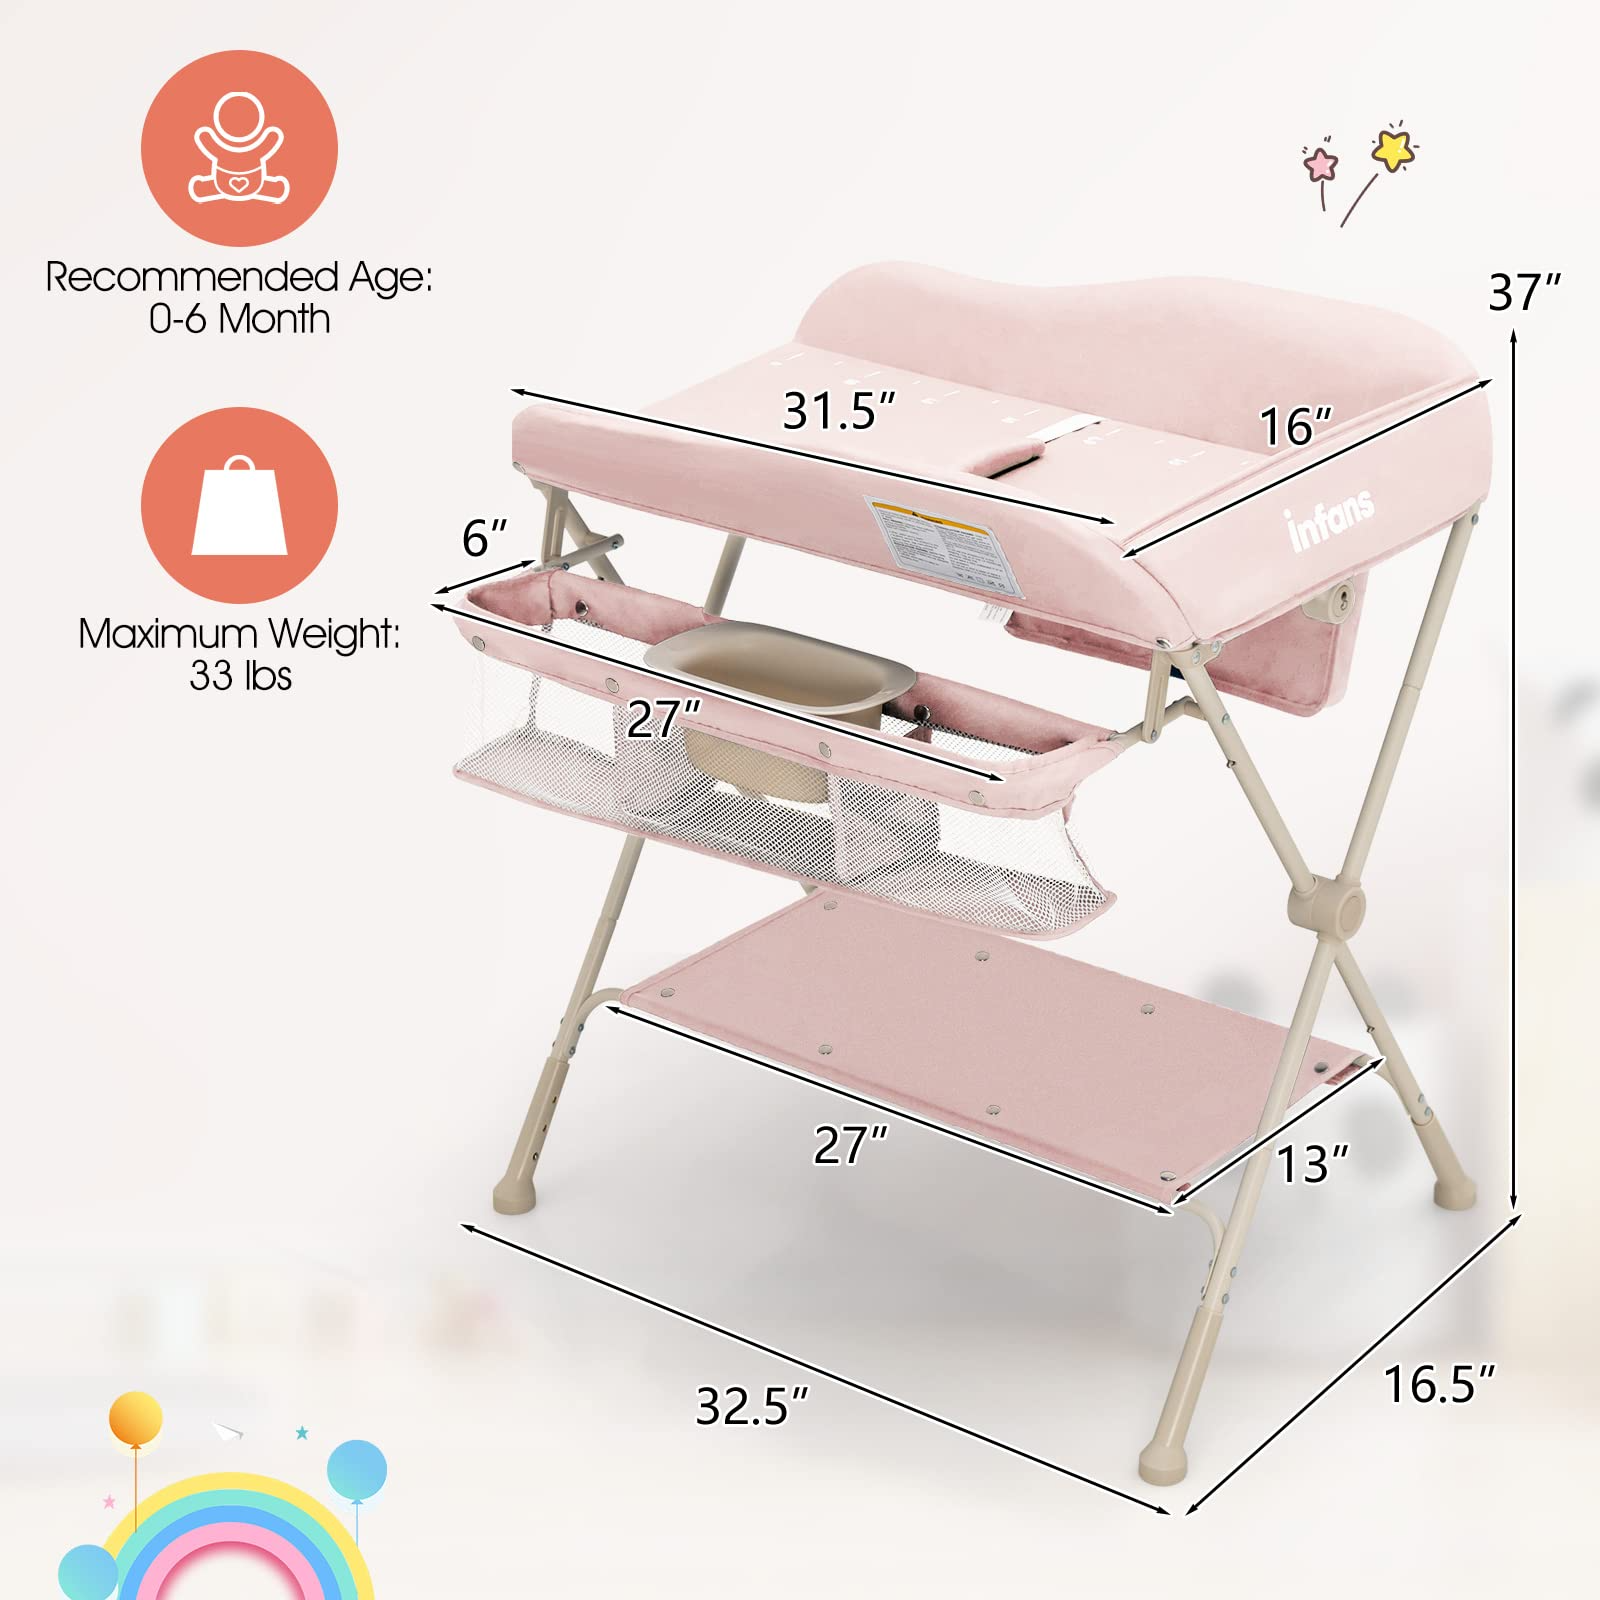 INFANS Baby Changing Table, Folding Diaper Station Portable Nursery  Organizer with Safety Belt and Large Storage Racks for Newborn Baby and  Infant